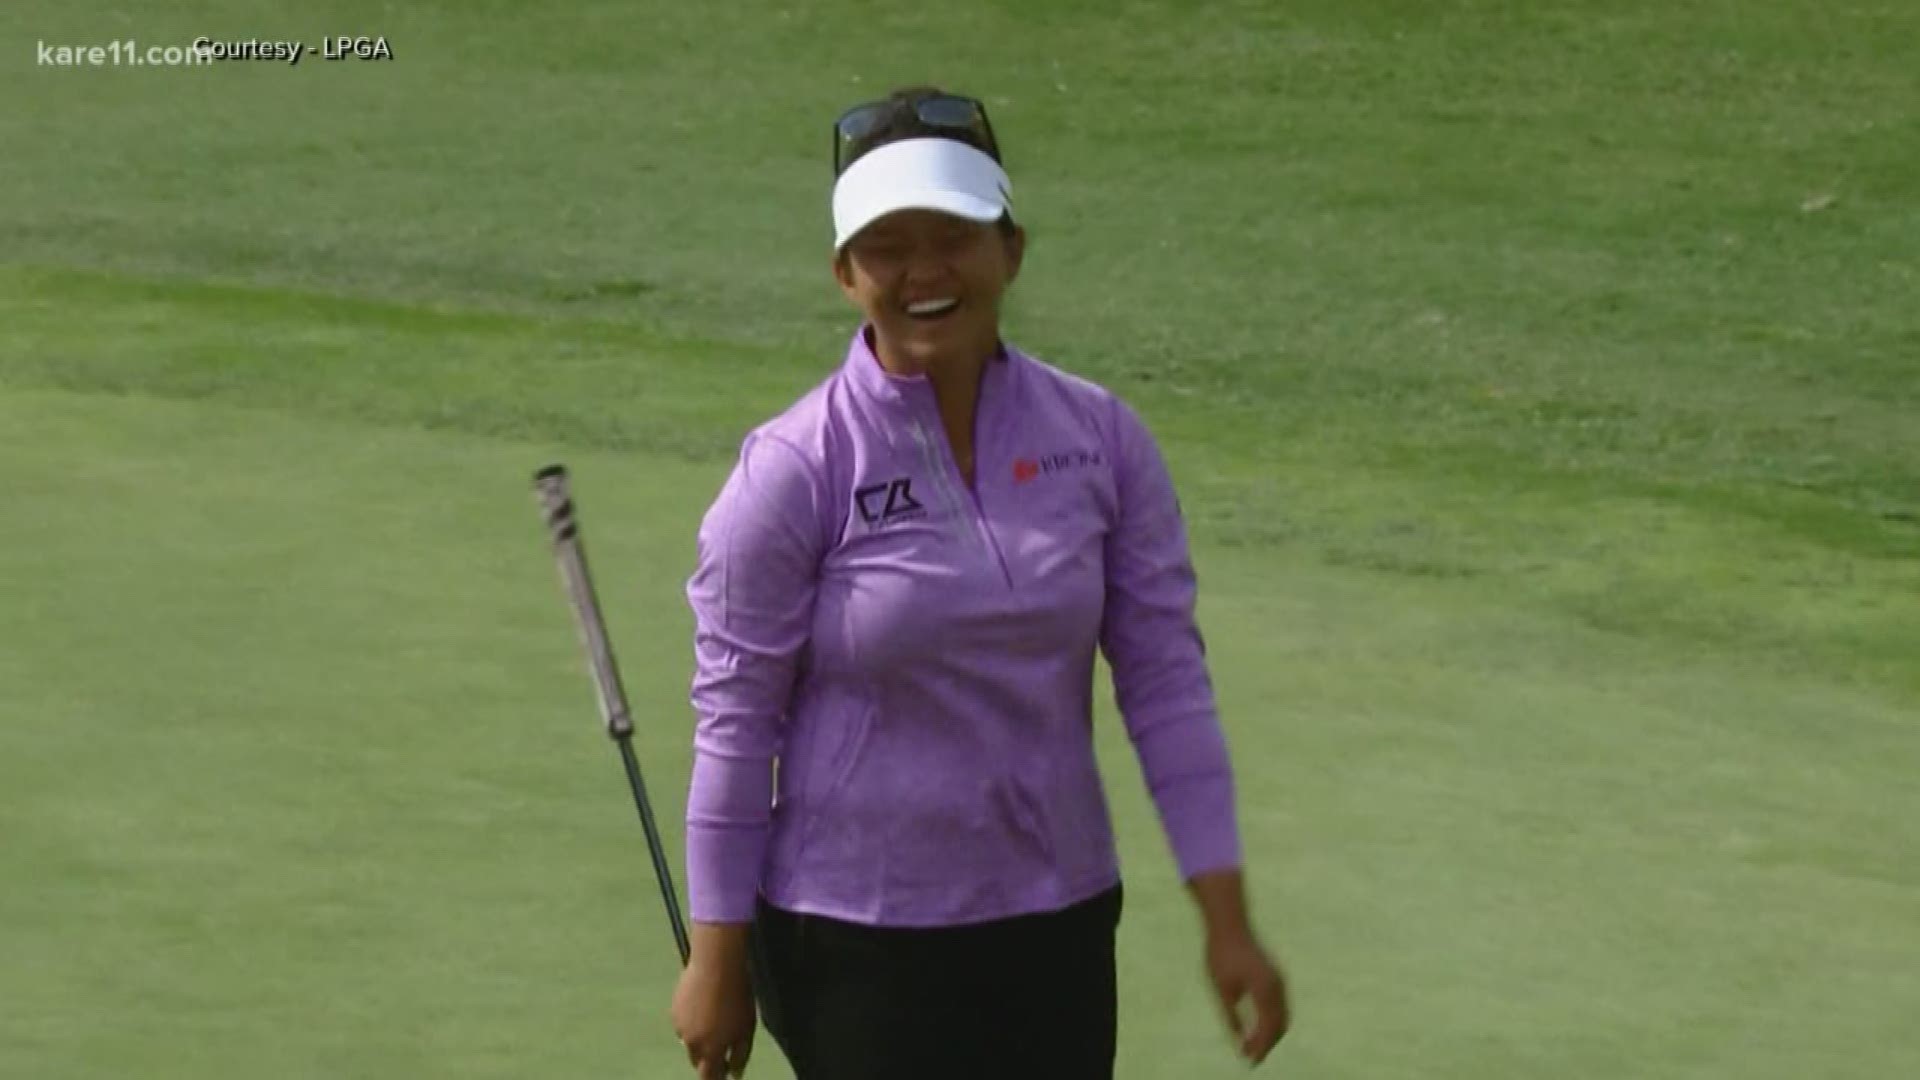 Meghan Kang, the first Hmong professional golfer, just finished in the top 10 at last weekend's women's PGA Championship.